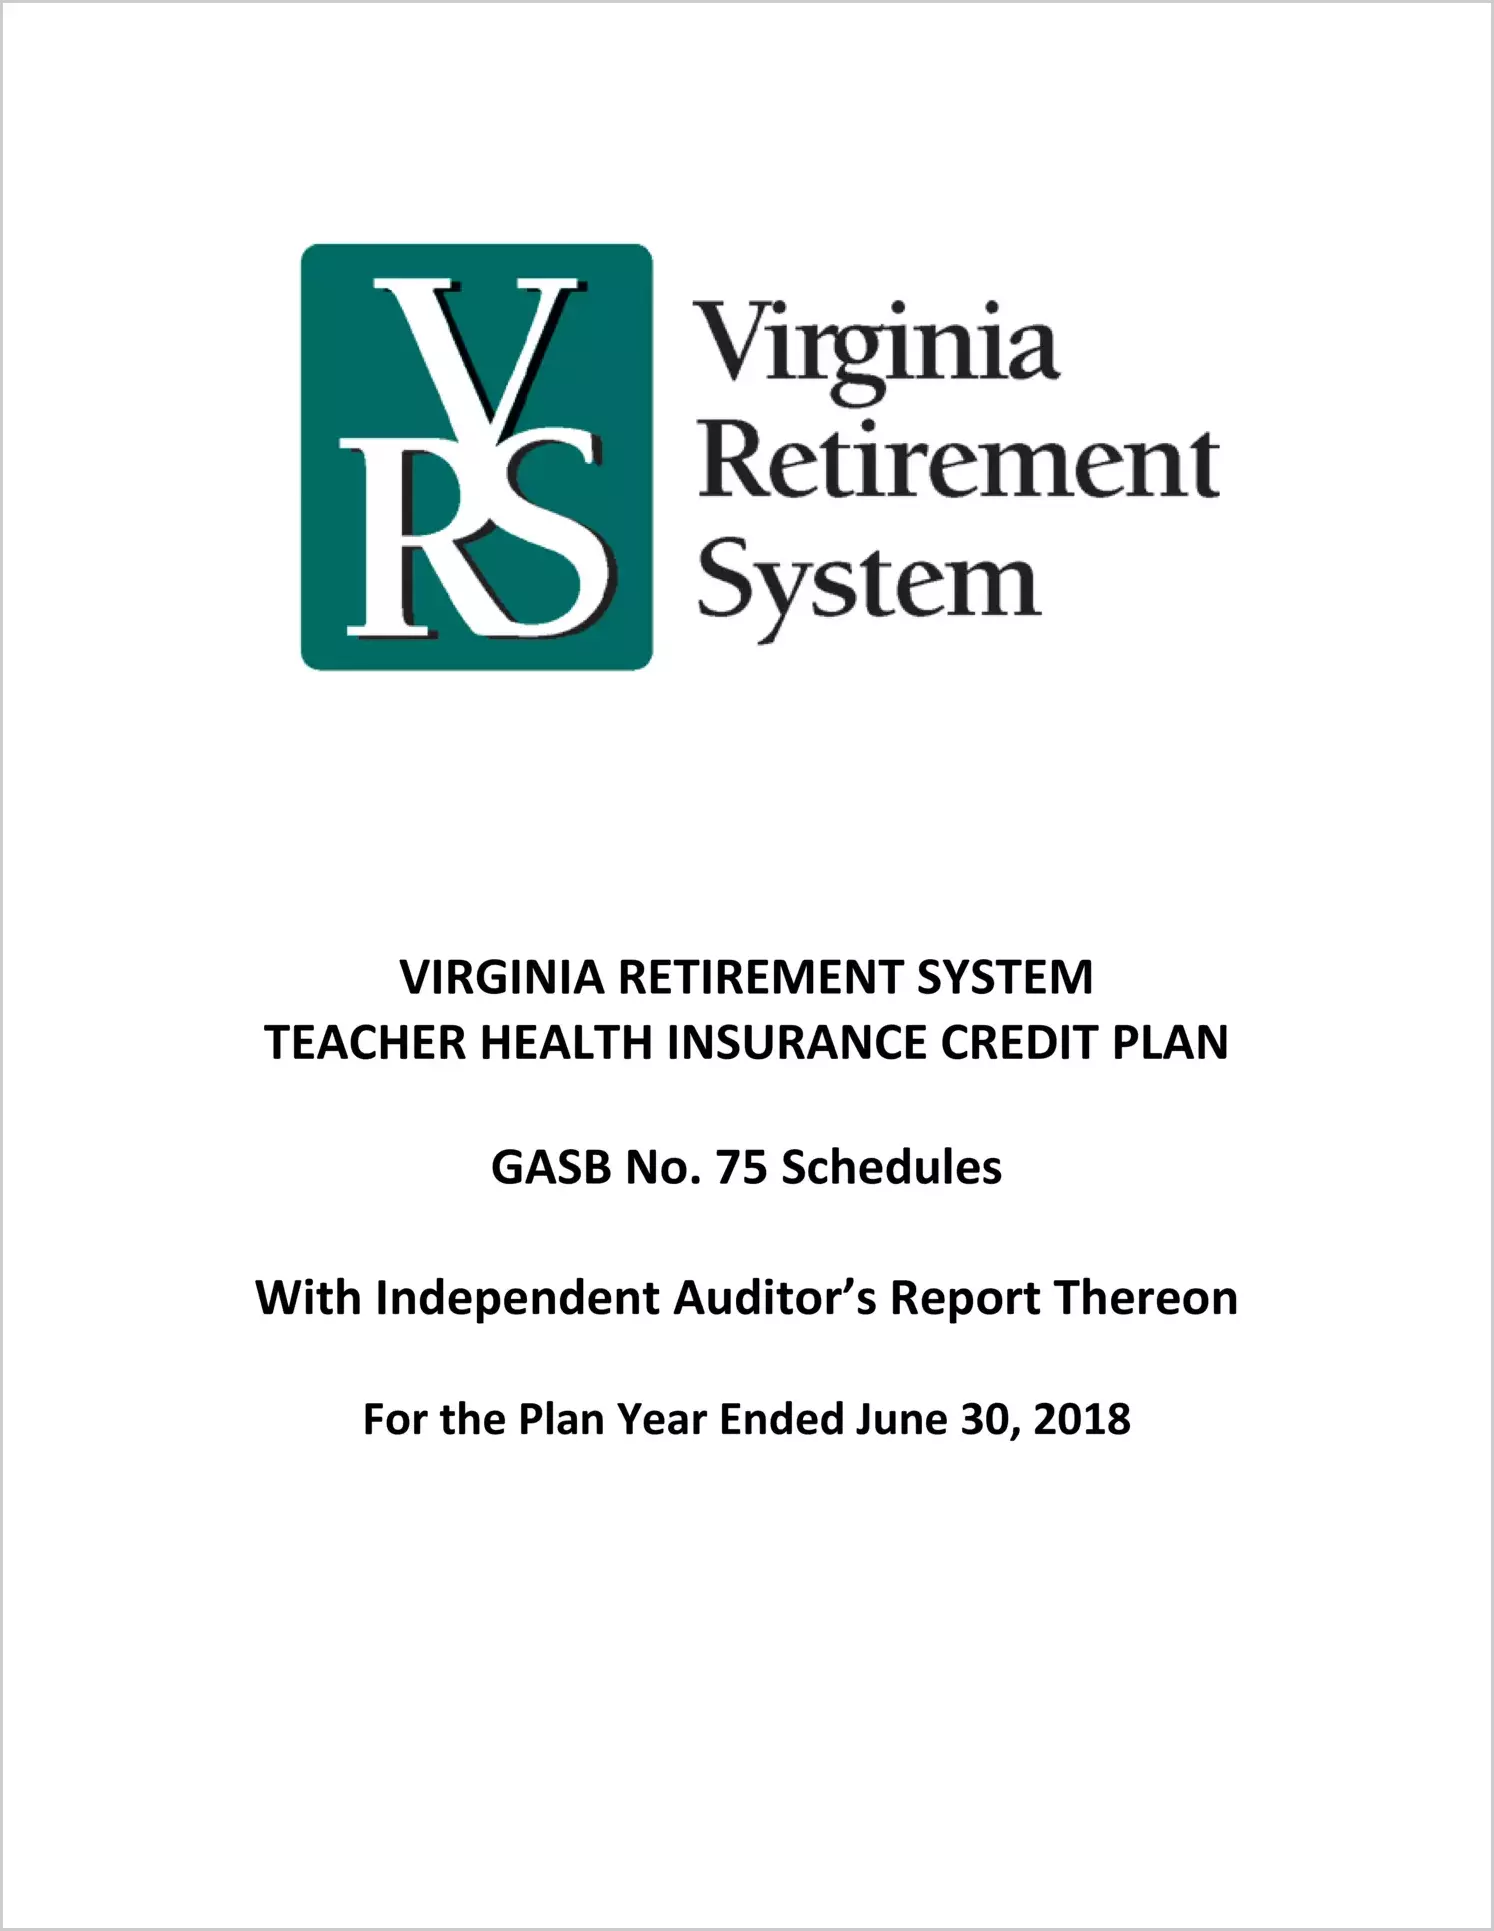 GASB 75 Schedule - Virginia Retirement System Teacher Health Insurance Credit Plan for the plan year ended June 30, 2018